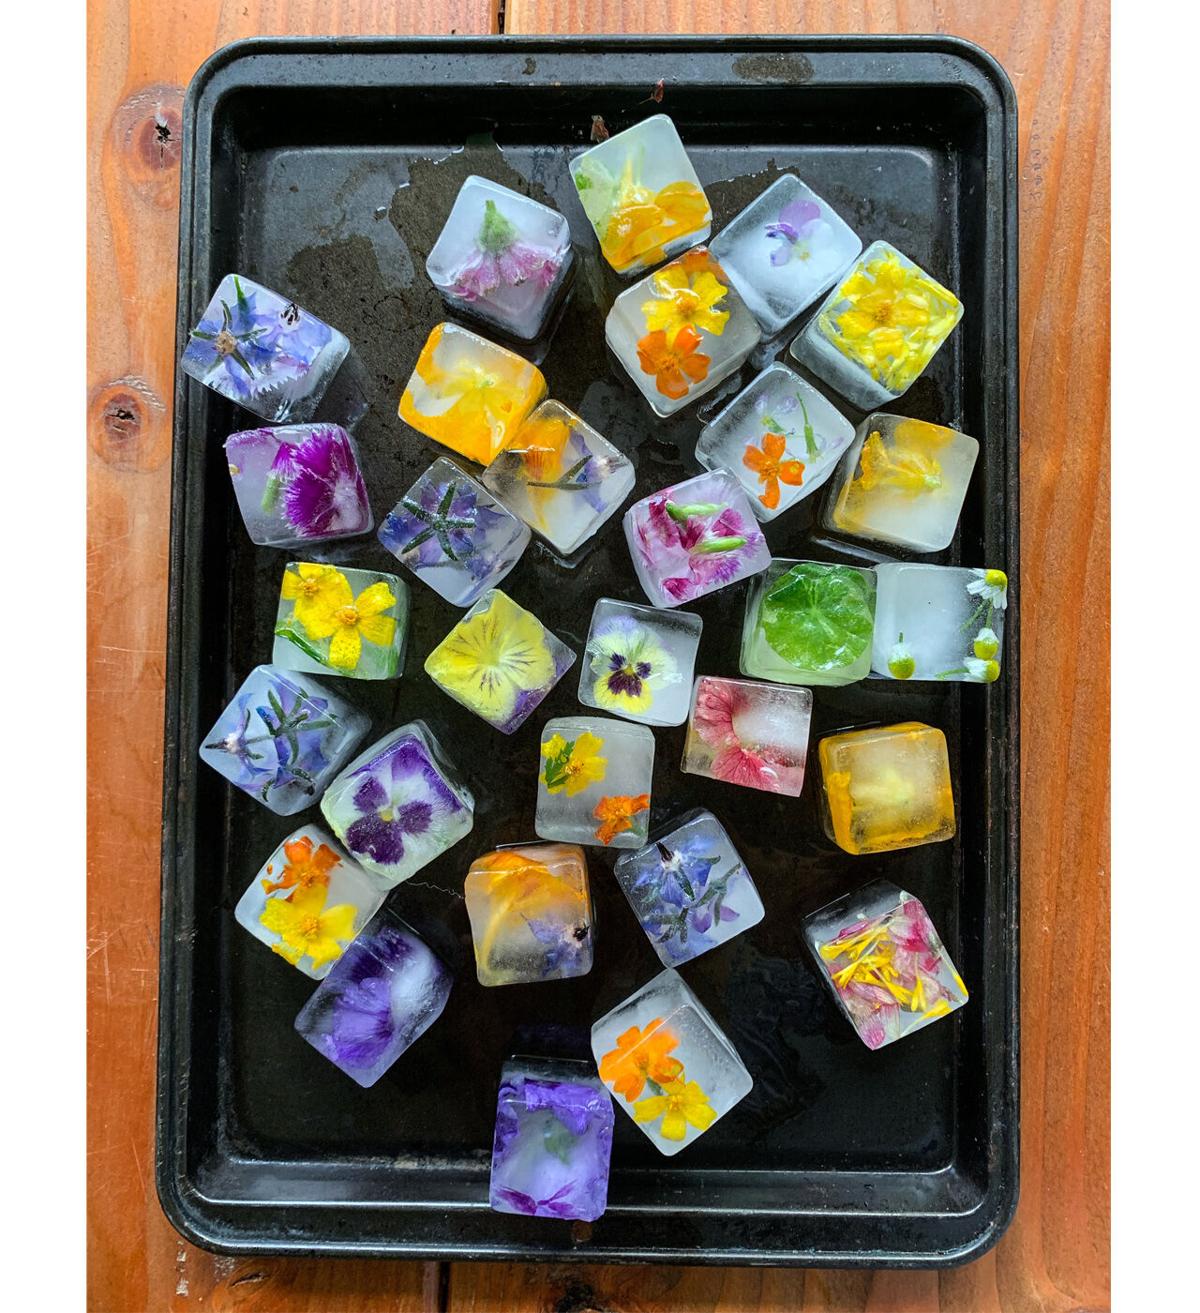 How to Make Edible Flower Ice Cubes